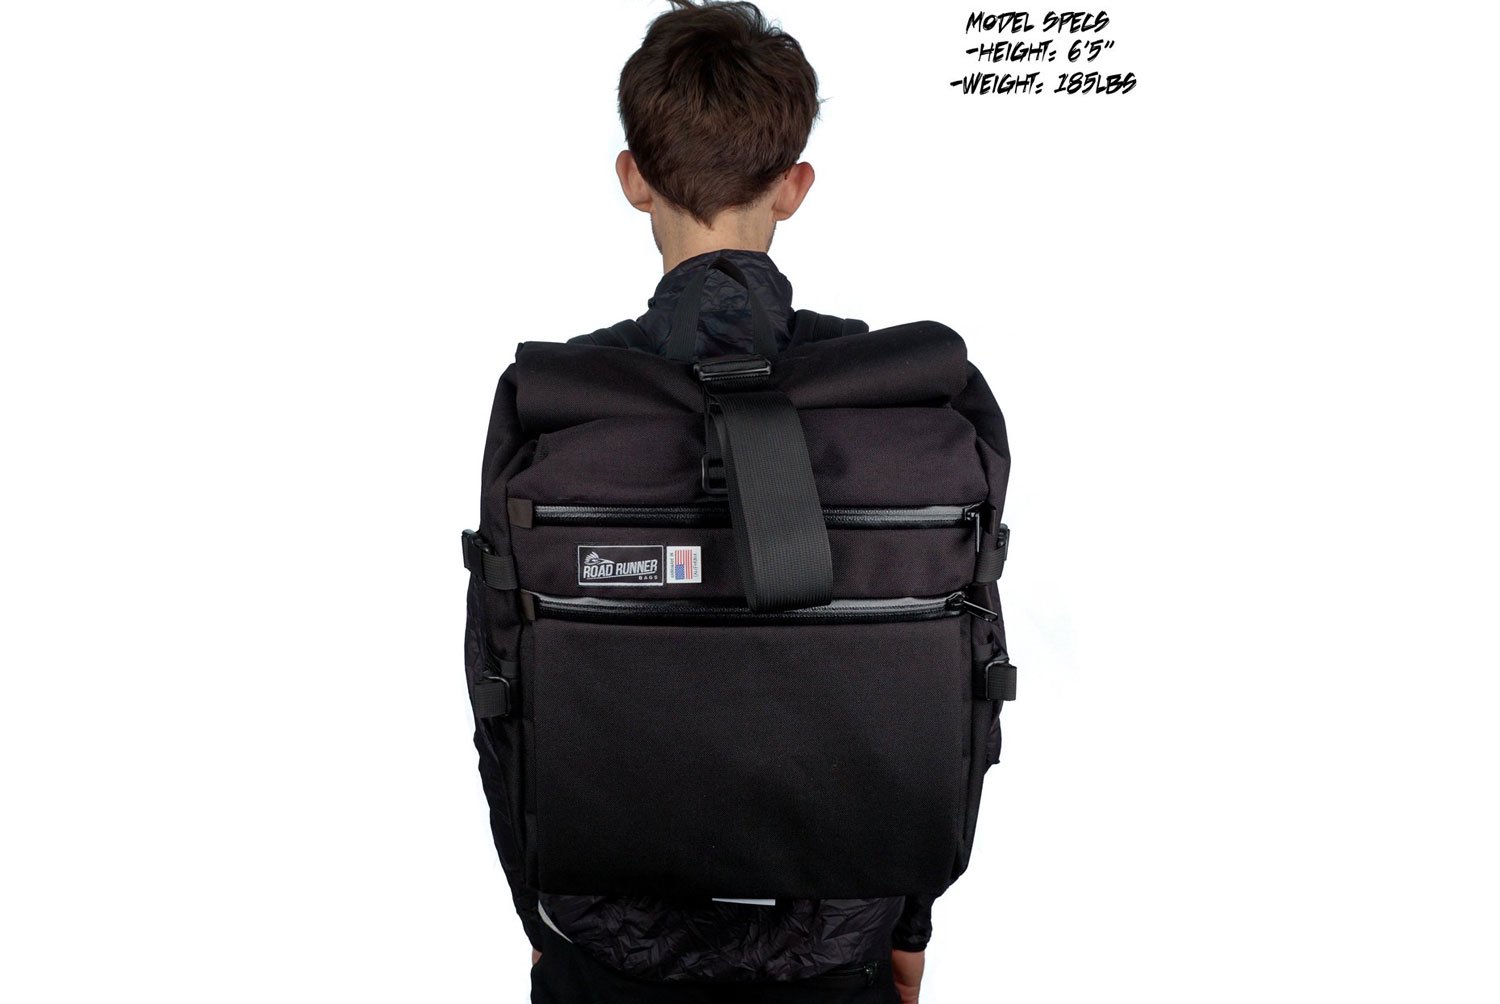 Large Roll Top Backpack-Pro (ラージロールトップバッグ・プロ